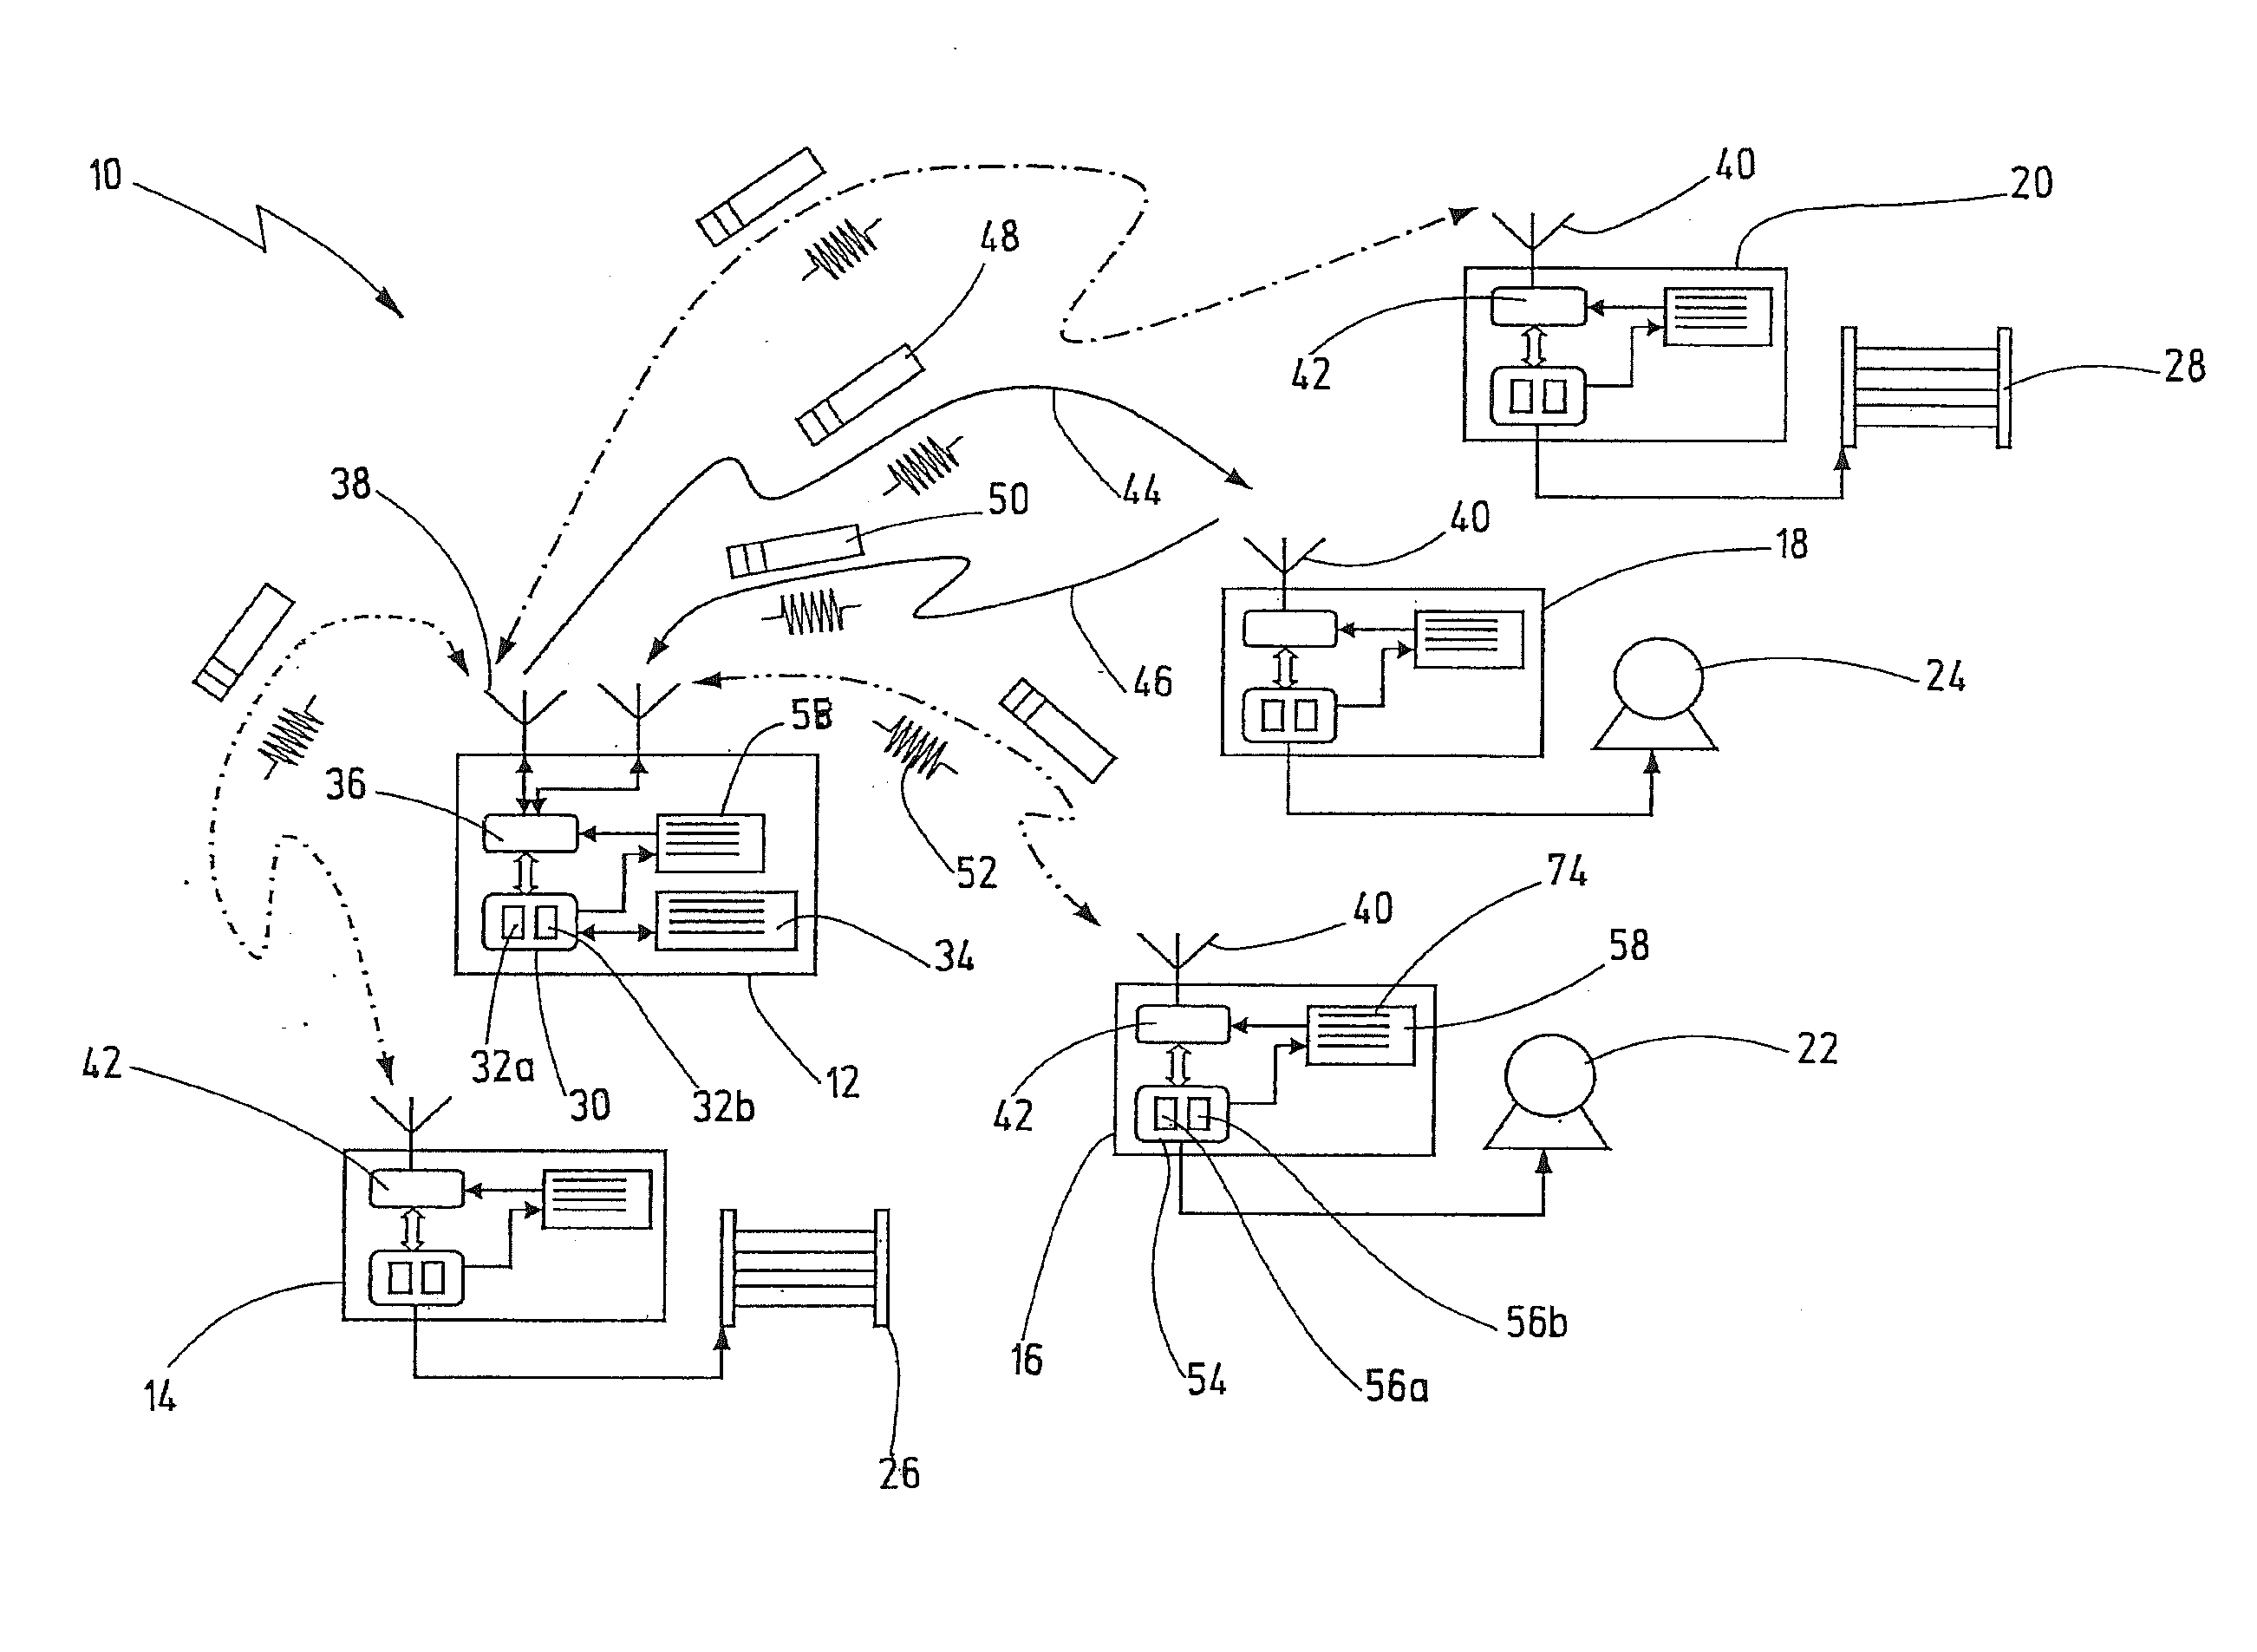 Method for transmitting data between a control unit and a plurality of remote I/O units of an automated installation